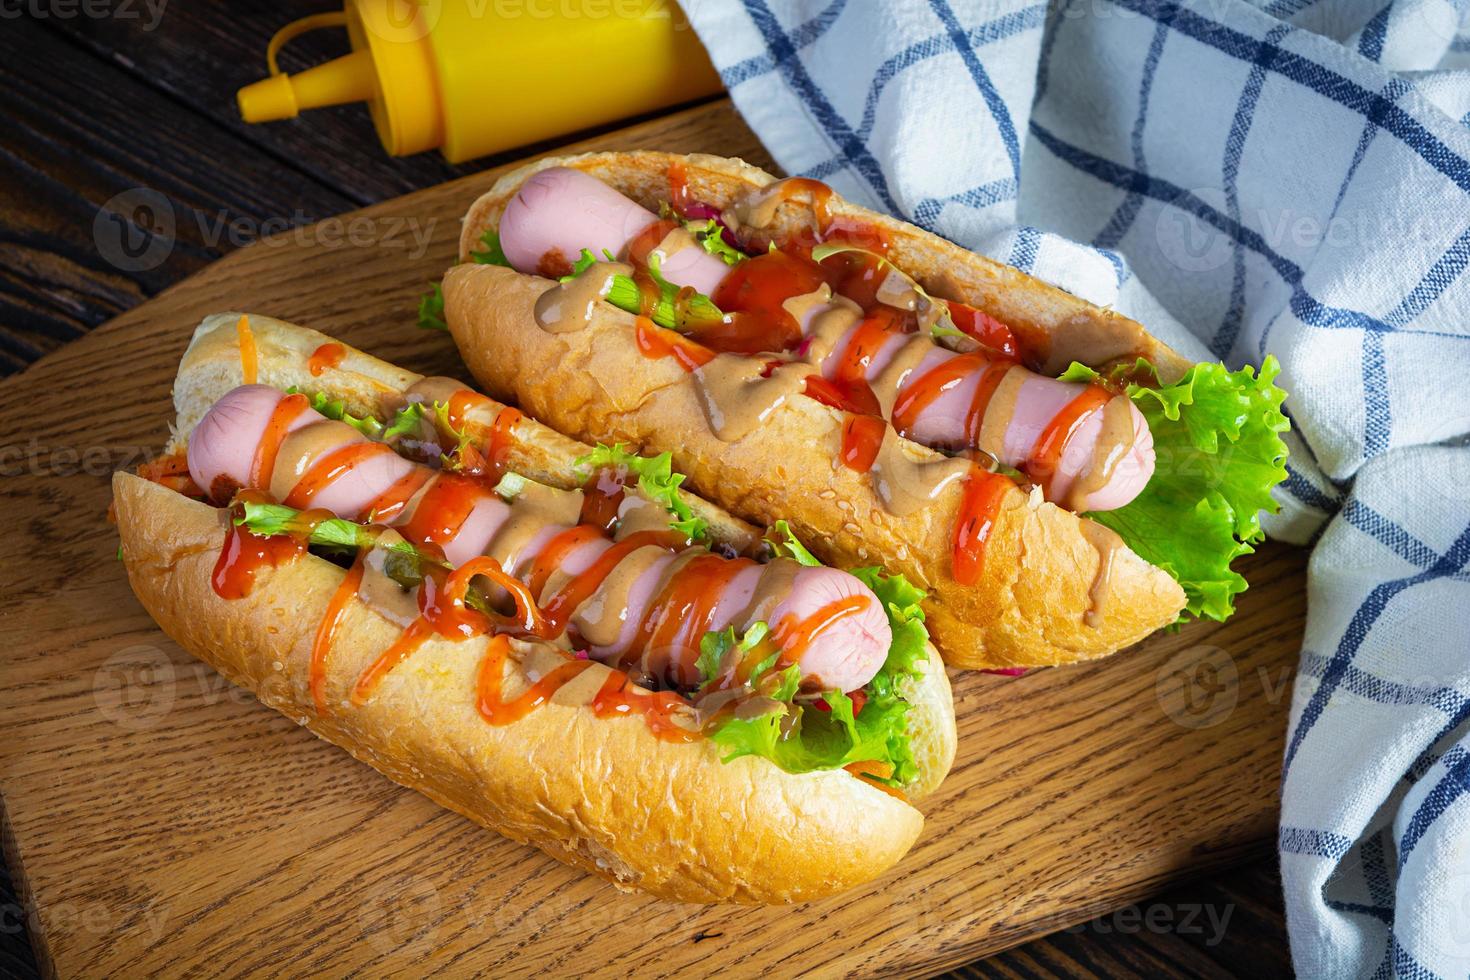 Delicious hot dog with ketchup and mustard on wooden background. Street food photo